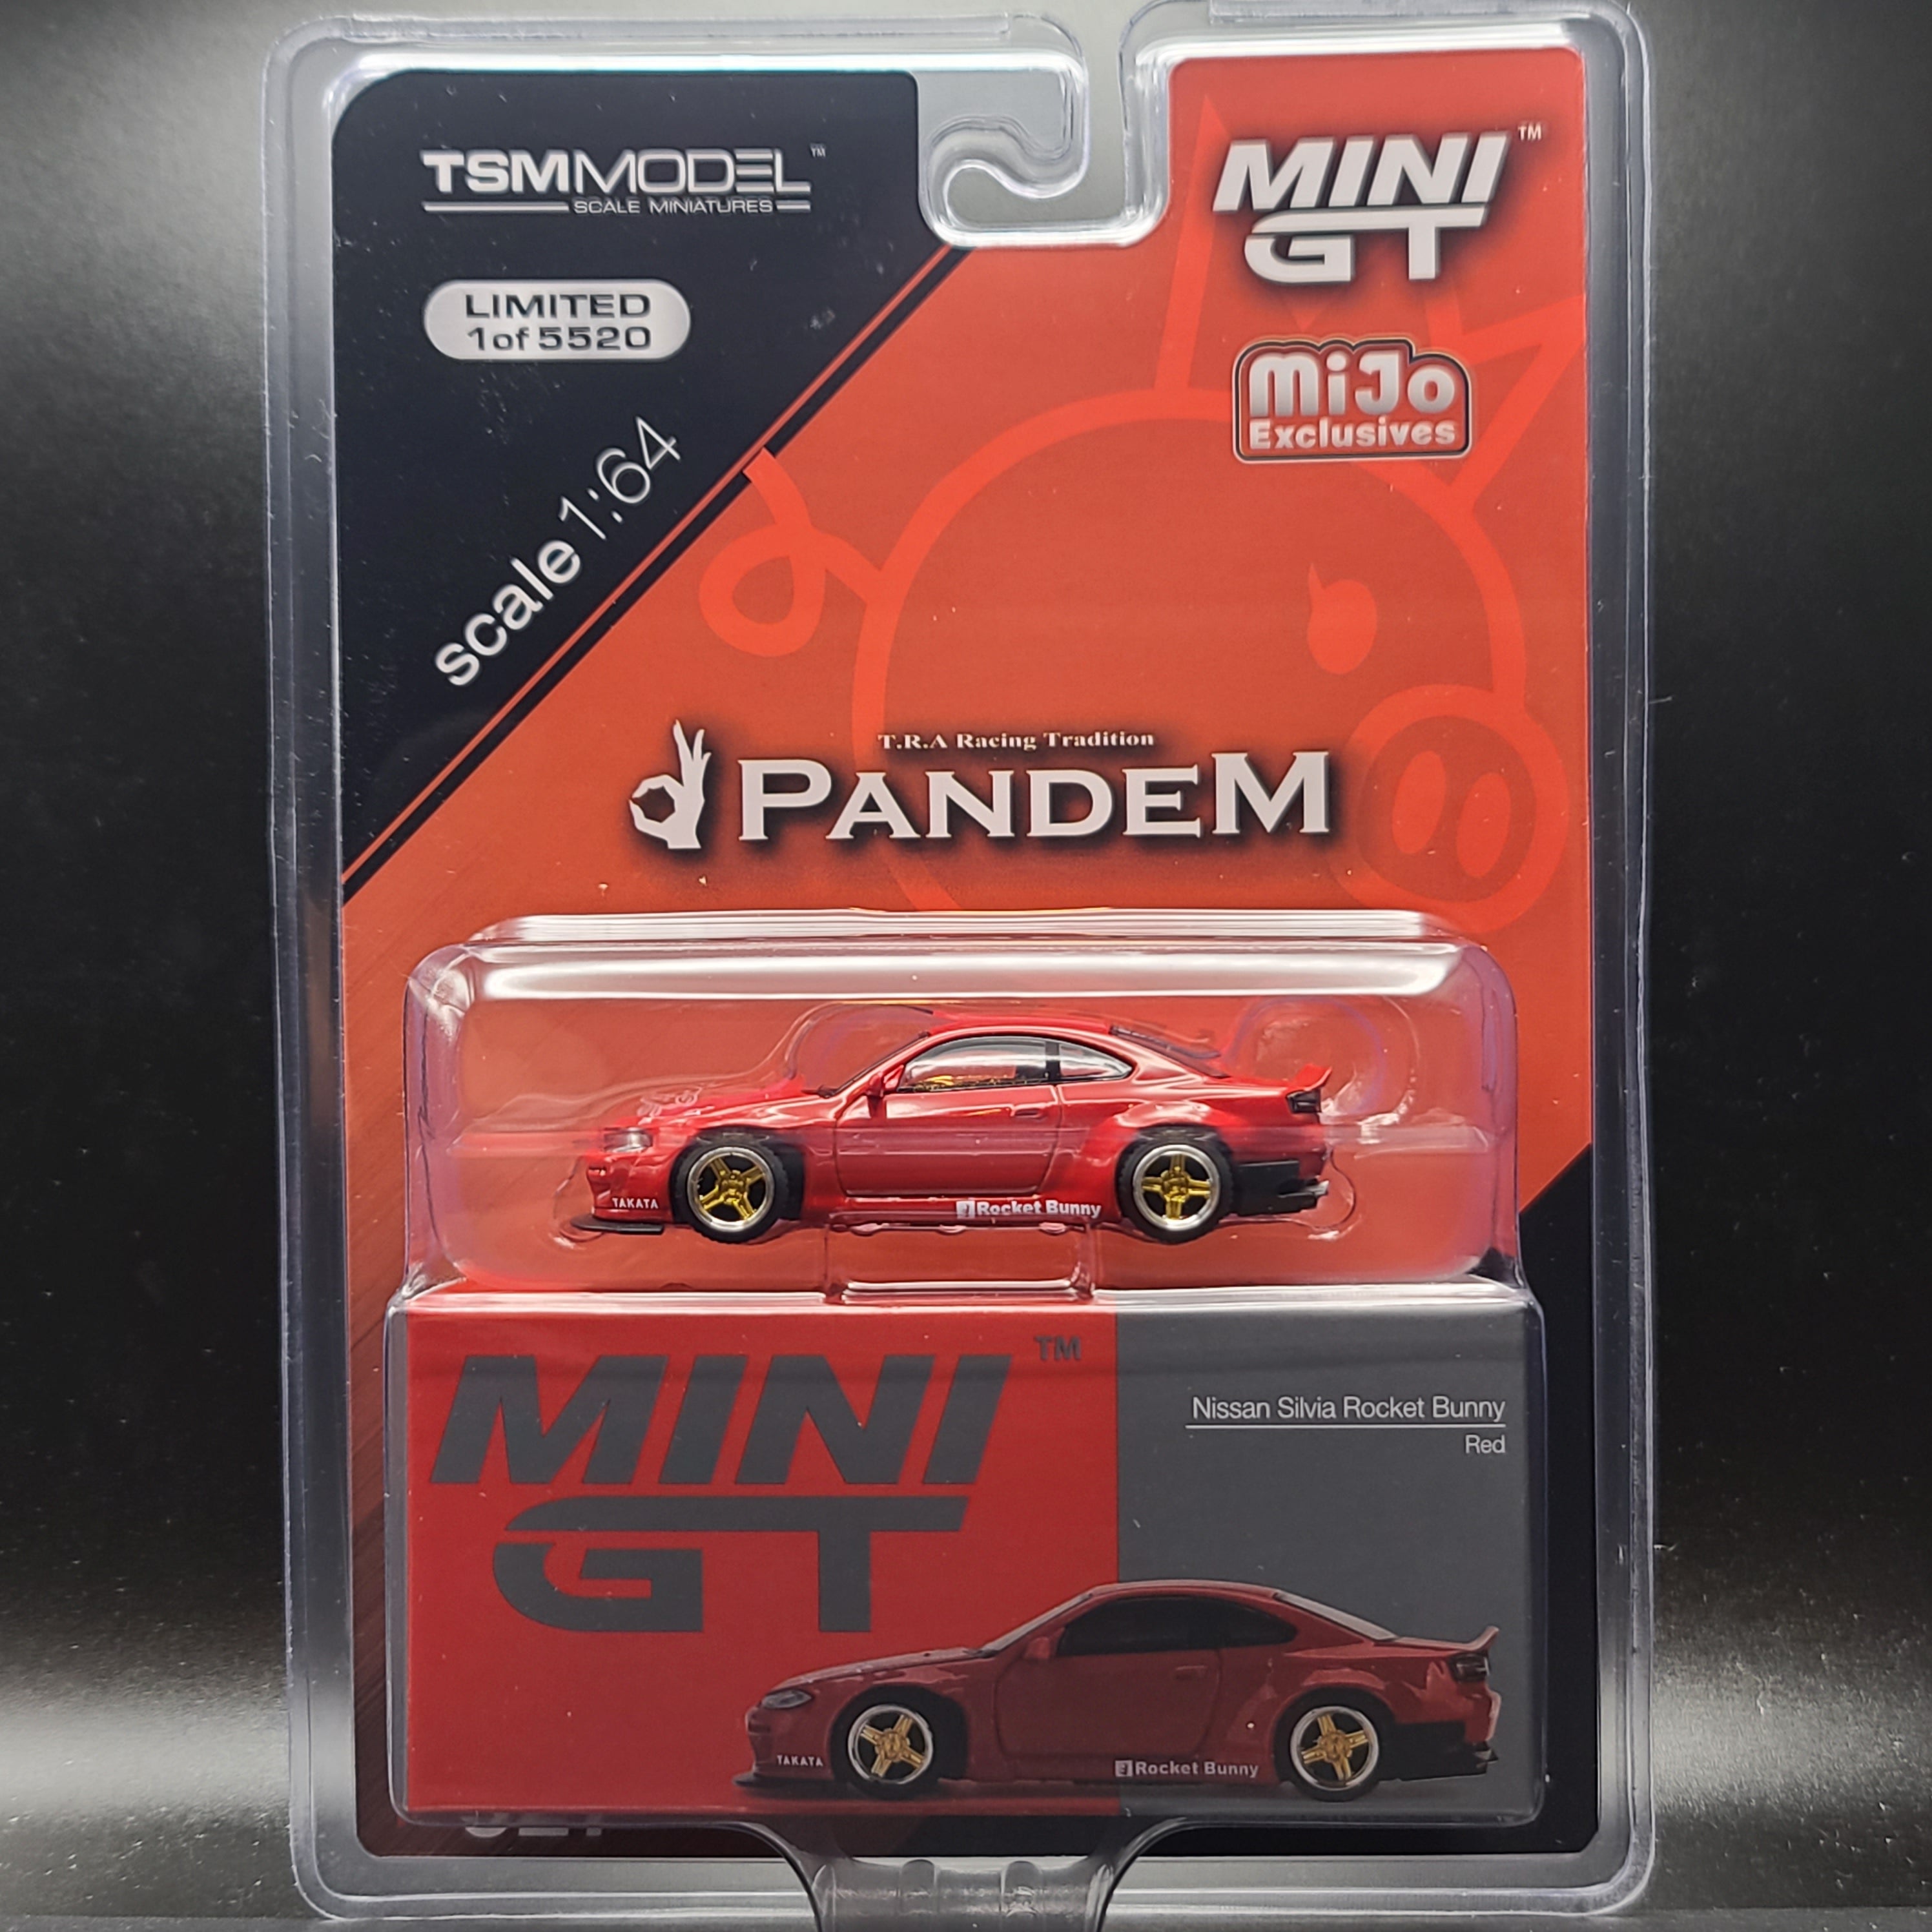 Mini GT Nissan Silvia S15 Rocket Bunny - 1:64 scale (2023 MIJO Exclusives - Limited Edition 1 of 5520)